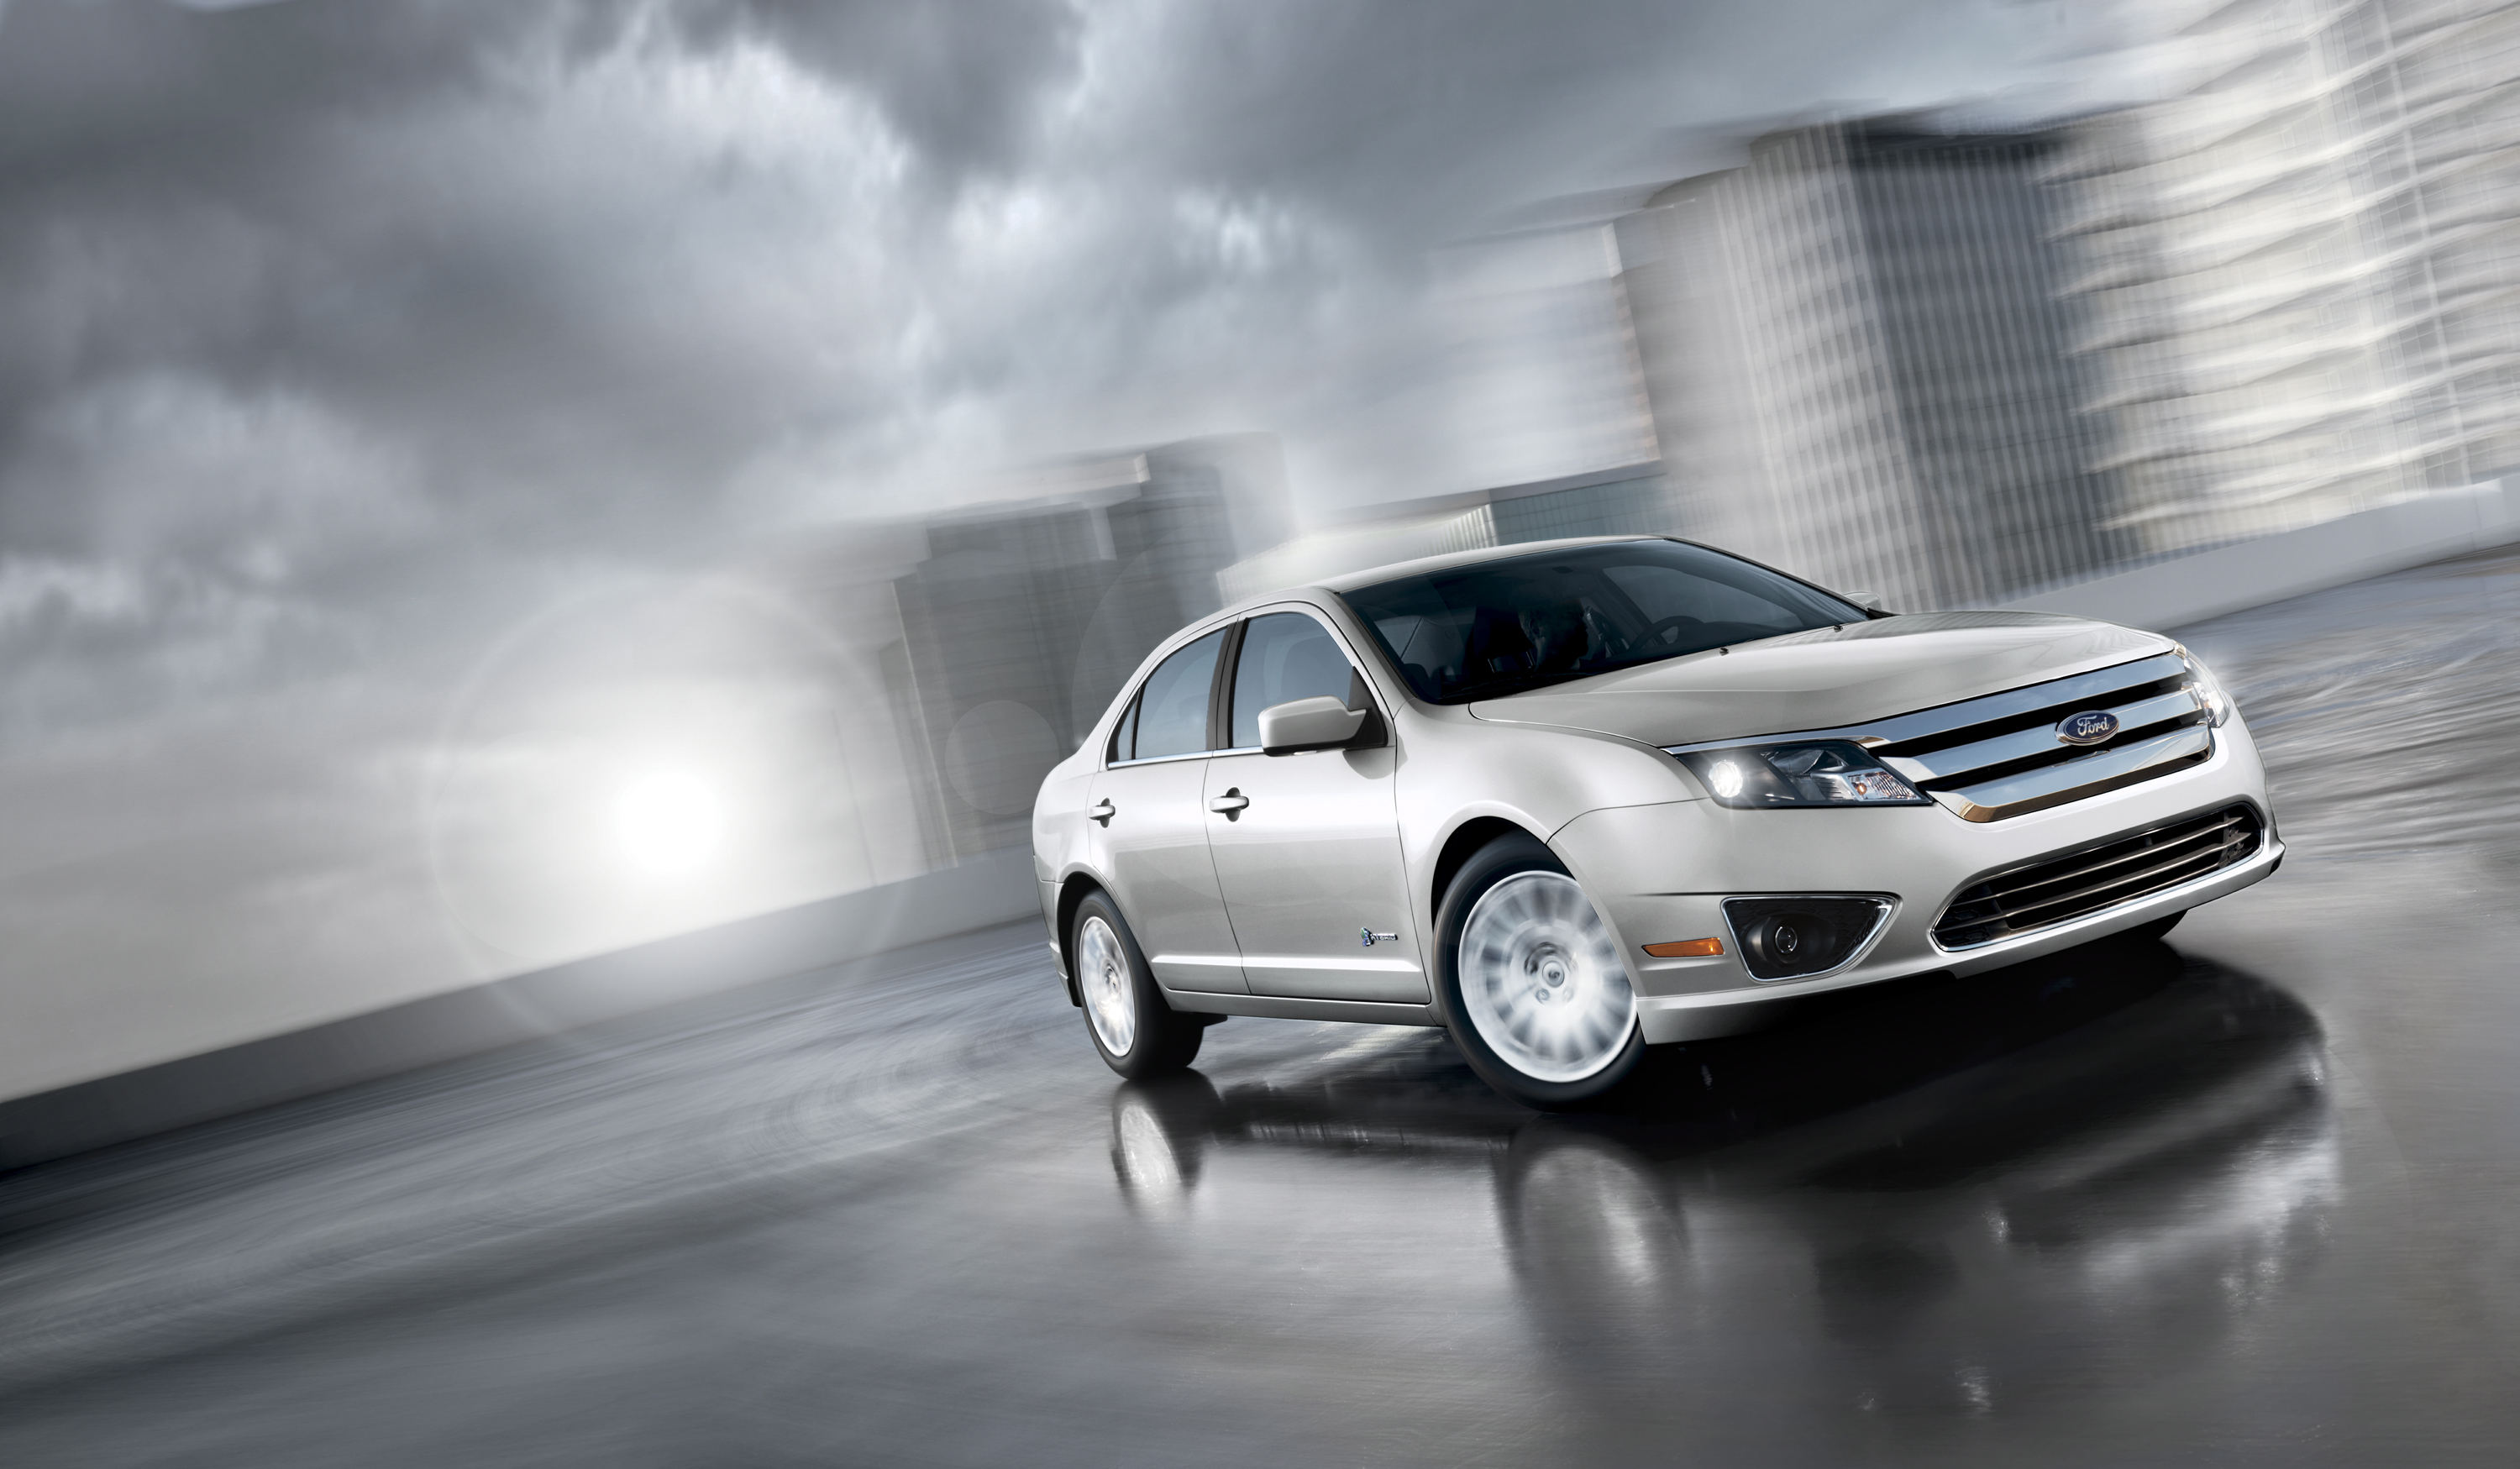 2010-2012 Ford Fusion, Lincoln MKZ, 2011 Mercury Milan Investigated For Power Steering ...